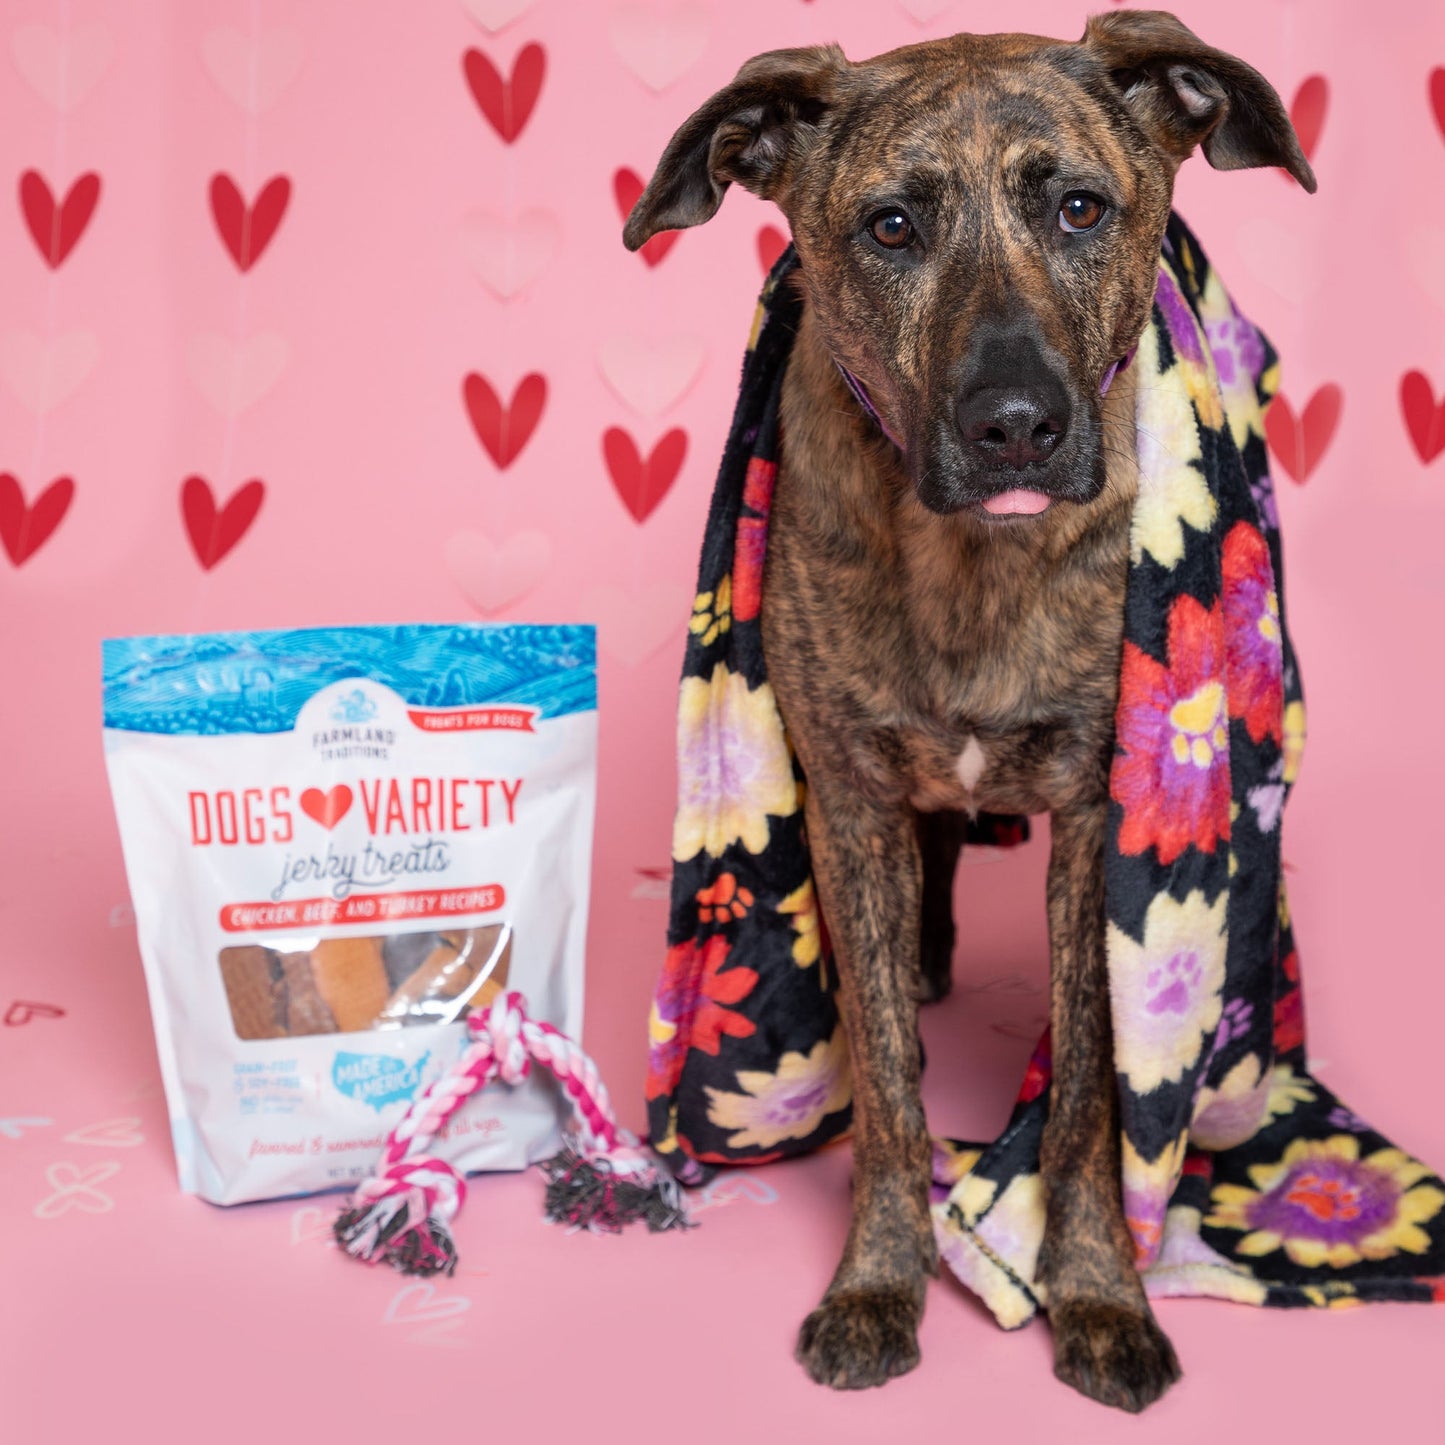 6th Annual Send a Valentine & Love To a Shelter Fur Baby